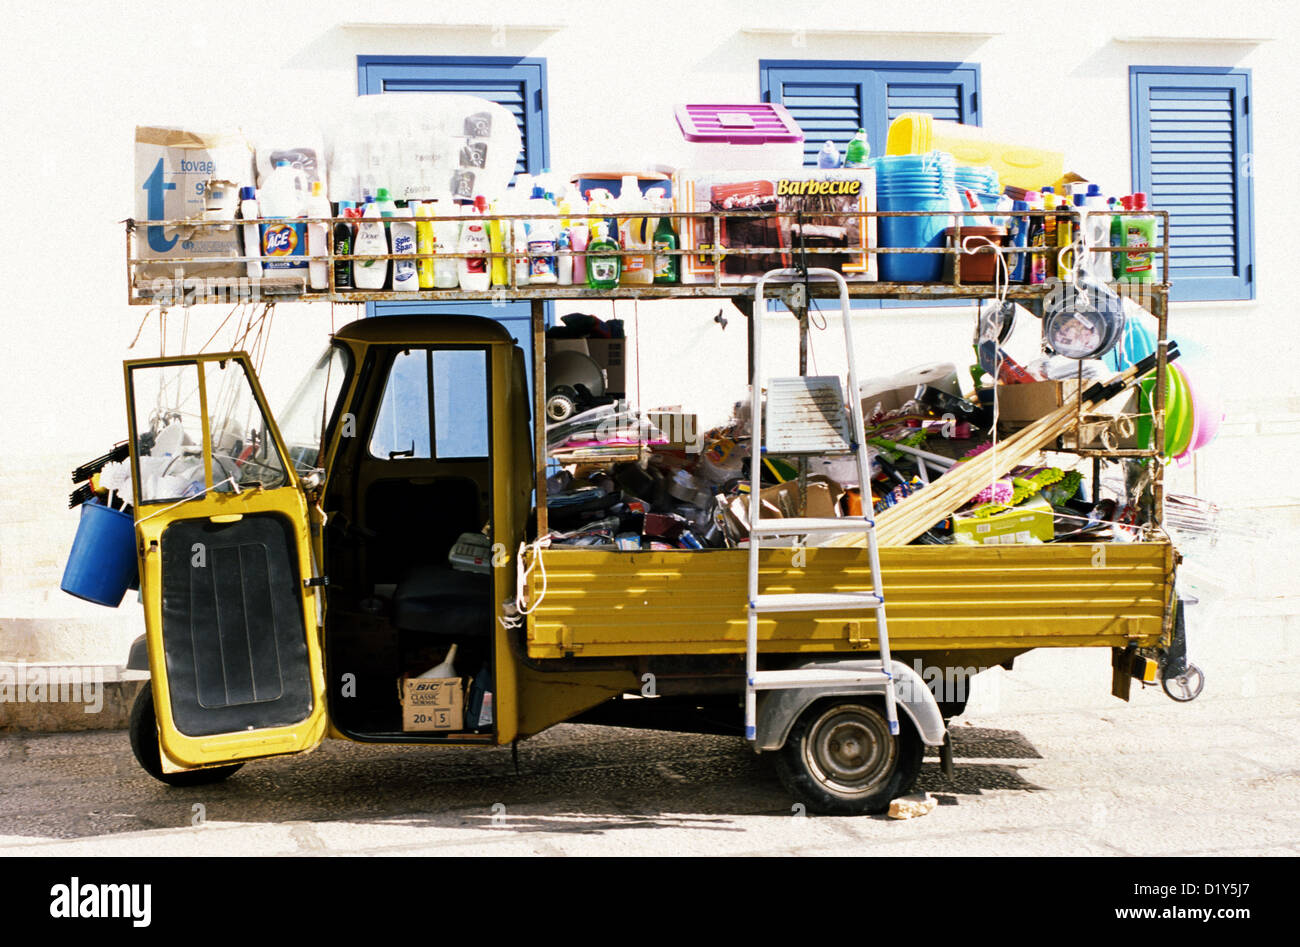 ape car full of different kind of product, Marettimo island Sicily, Italy Stock Photo